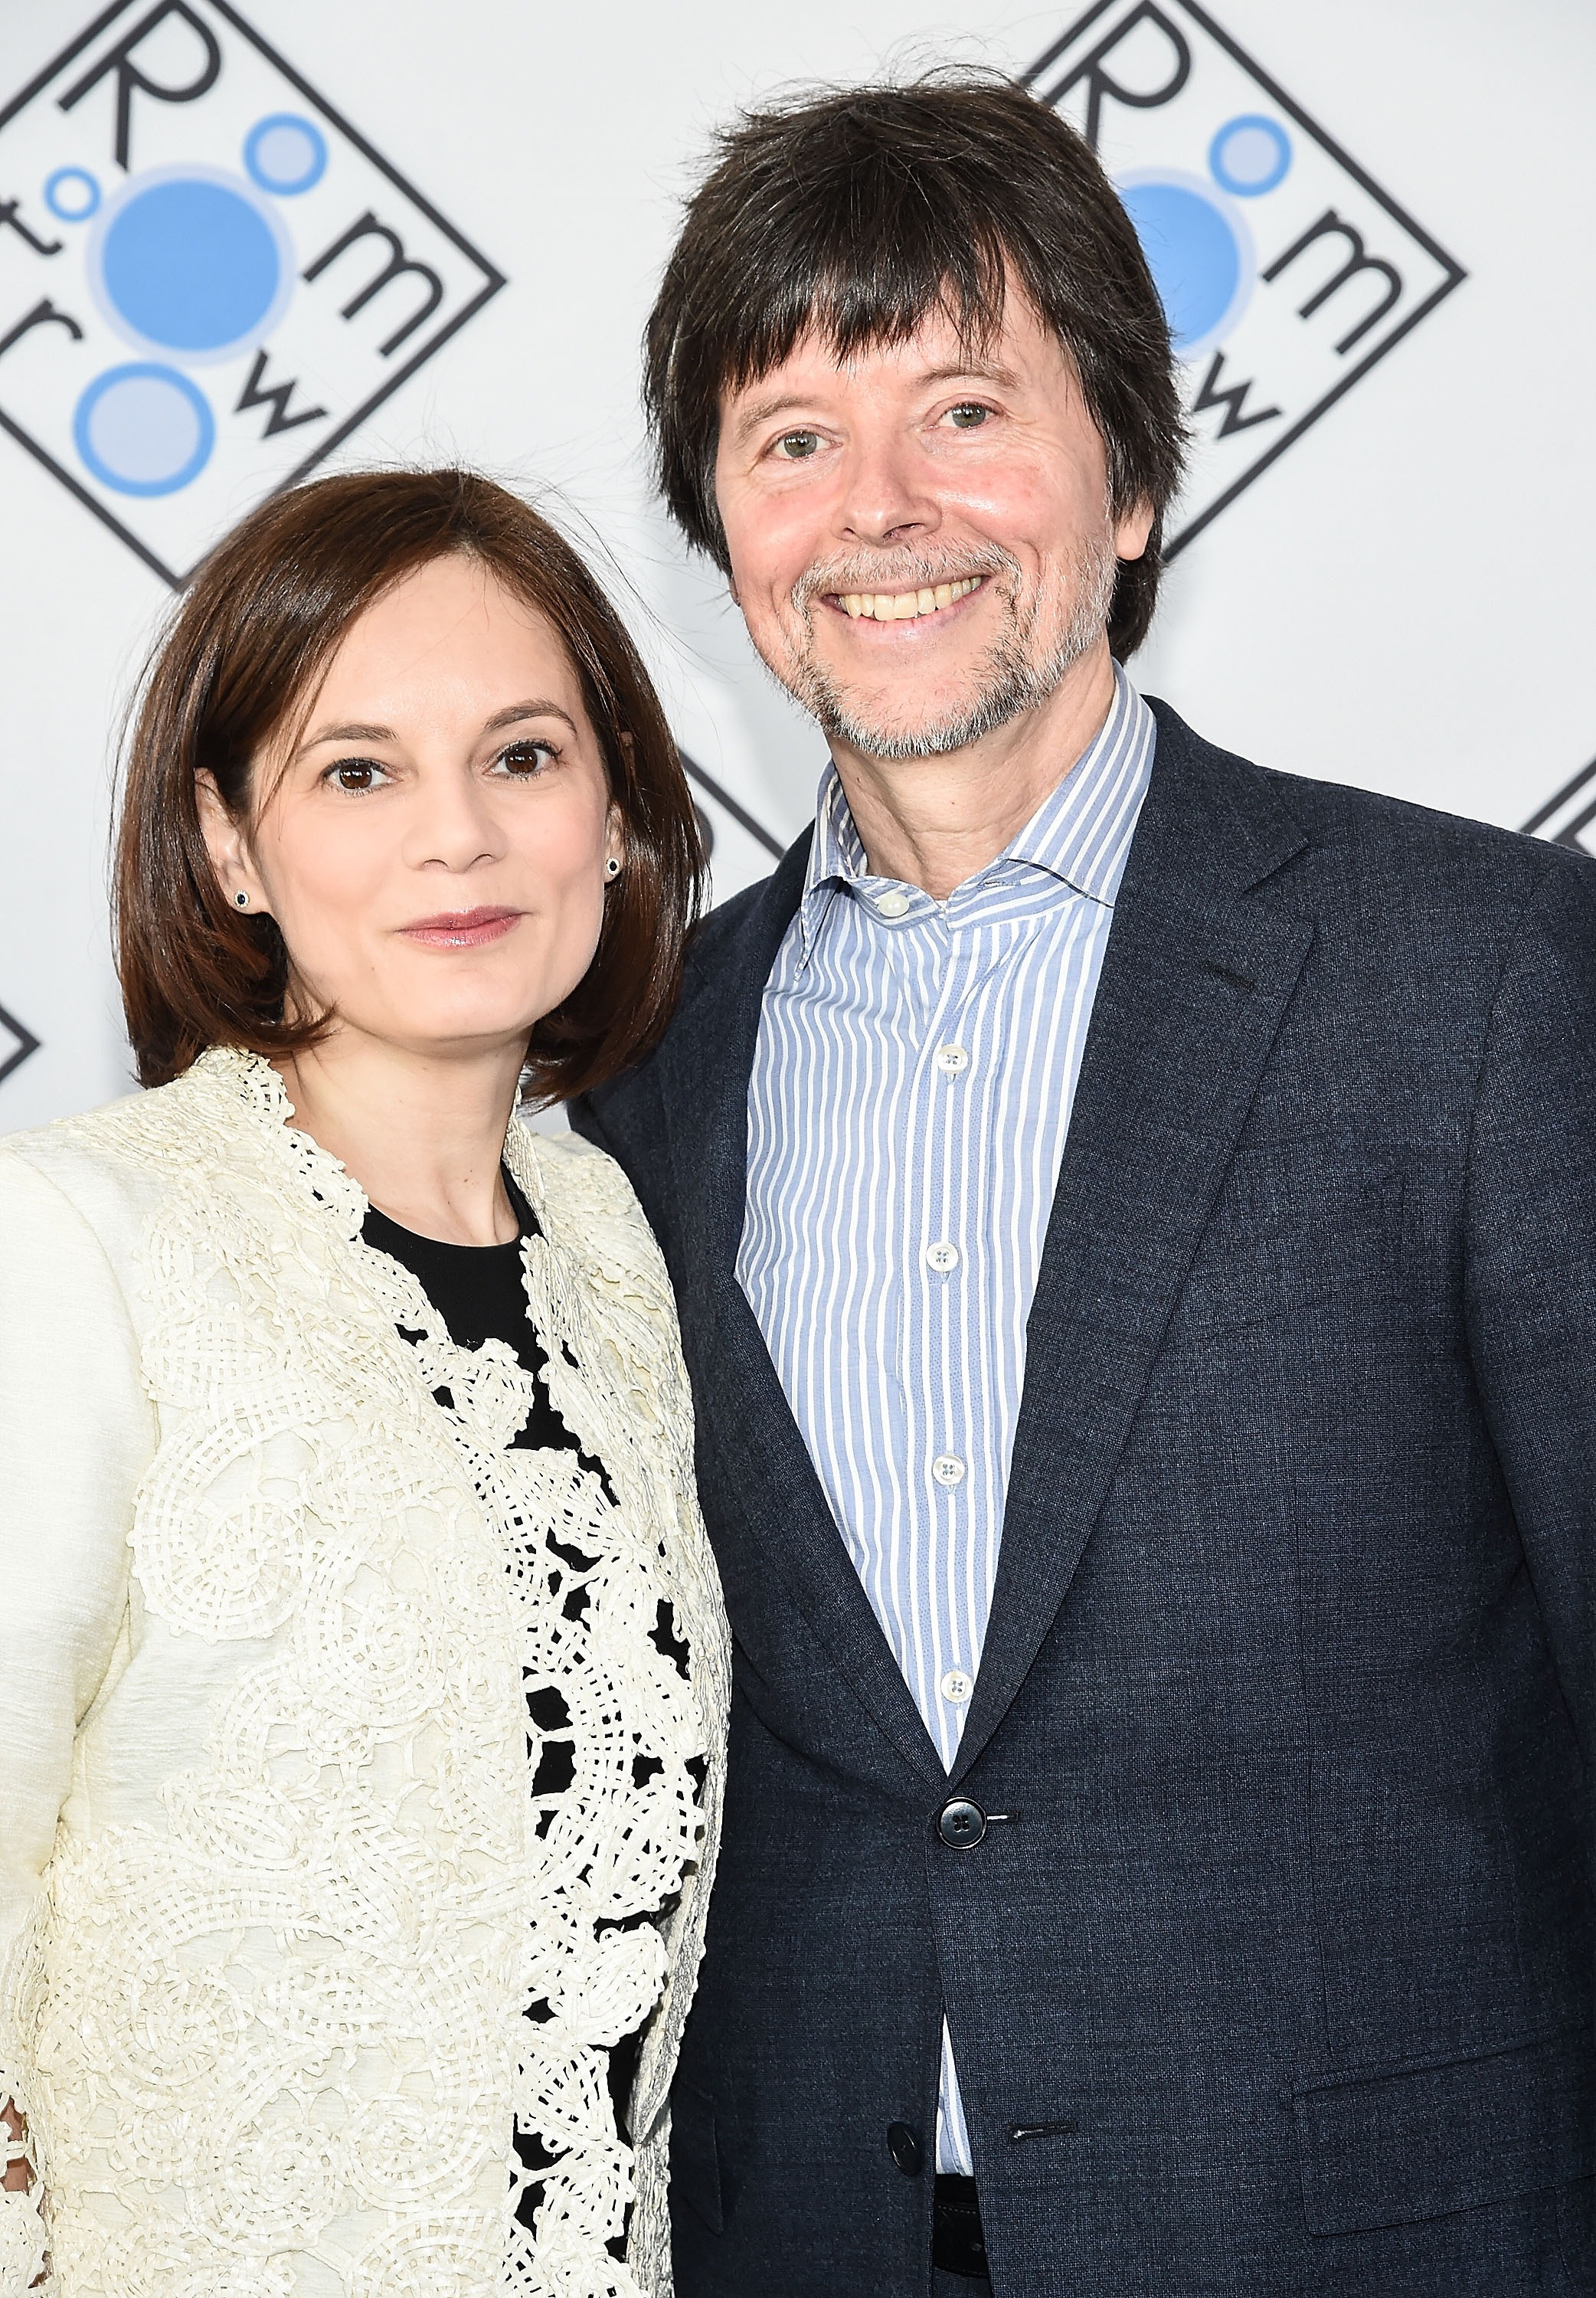 Julie Deborah Brown and Ken Burns during the Room To Grow Spring Benefit at Tribeca Three Sixty on April 14, 2016, in New York City. | Source: Getty Images